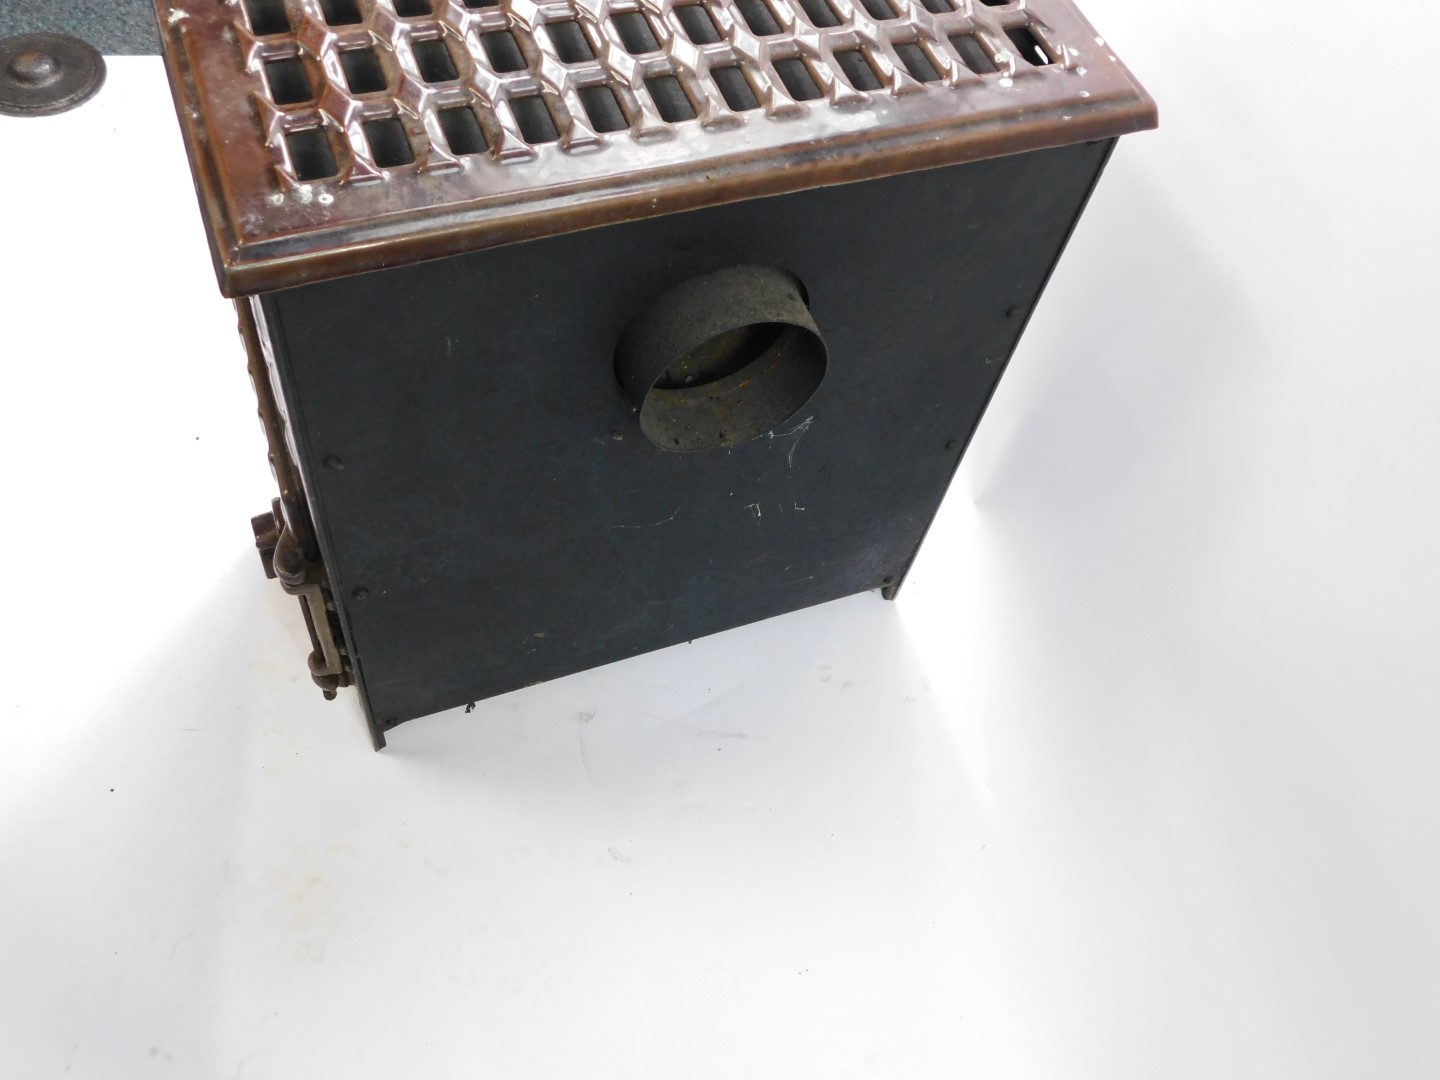 A French 1930's Poker brown enamel wood burning stove, 56cm high, 50.5cm wide, 29cm deep. - Image 4 of 4